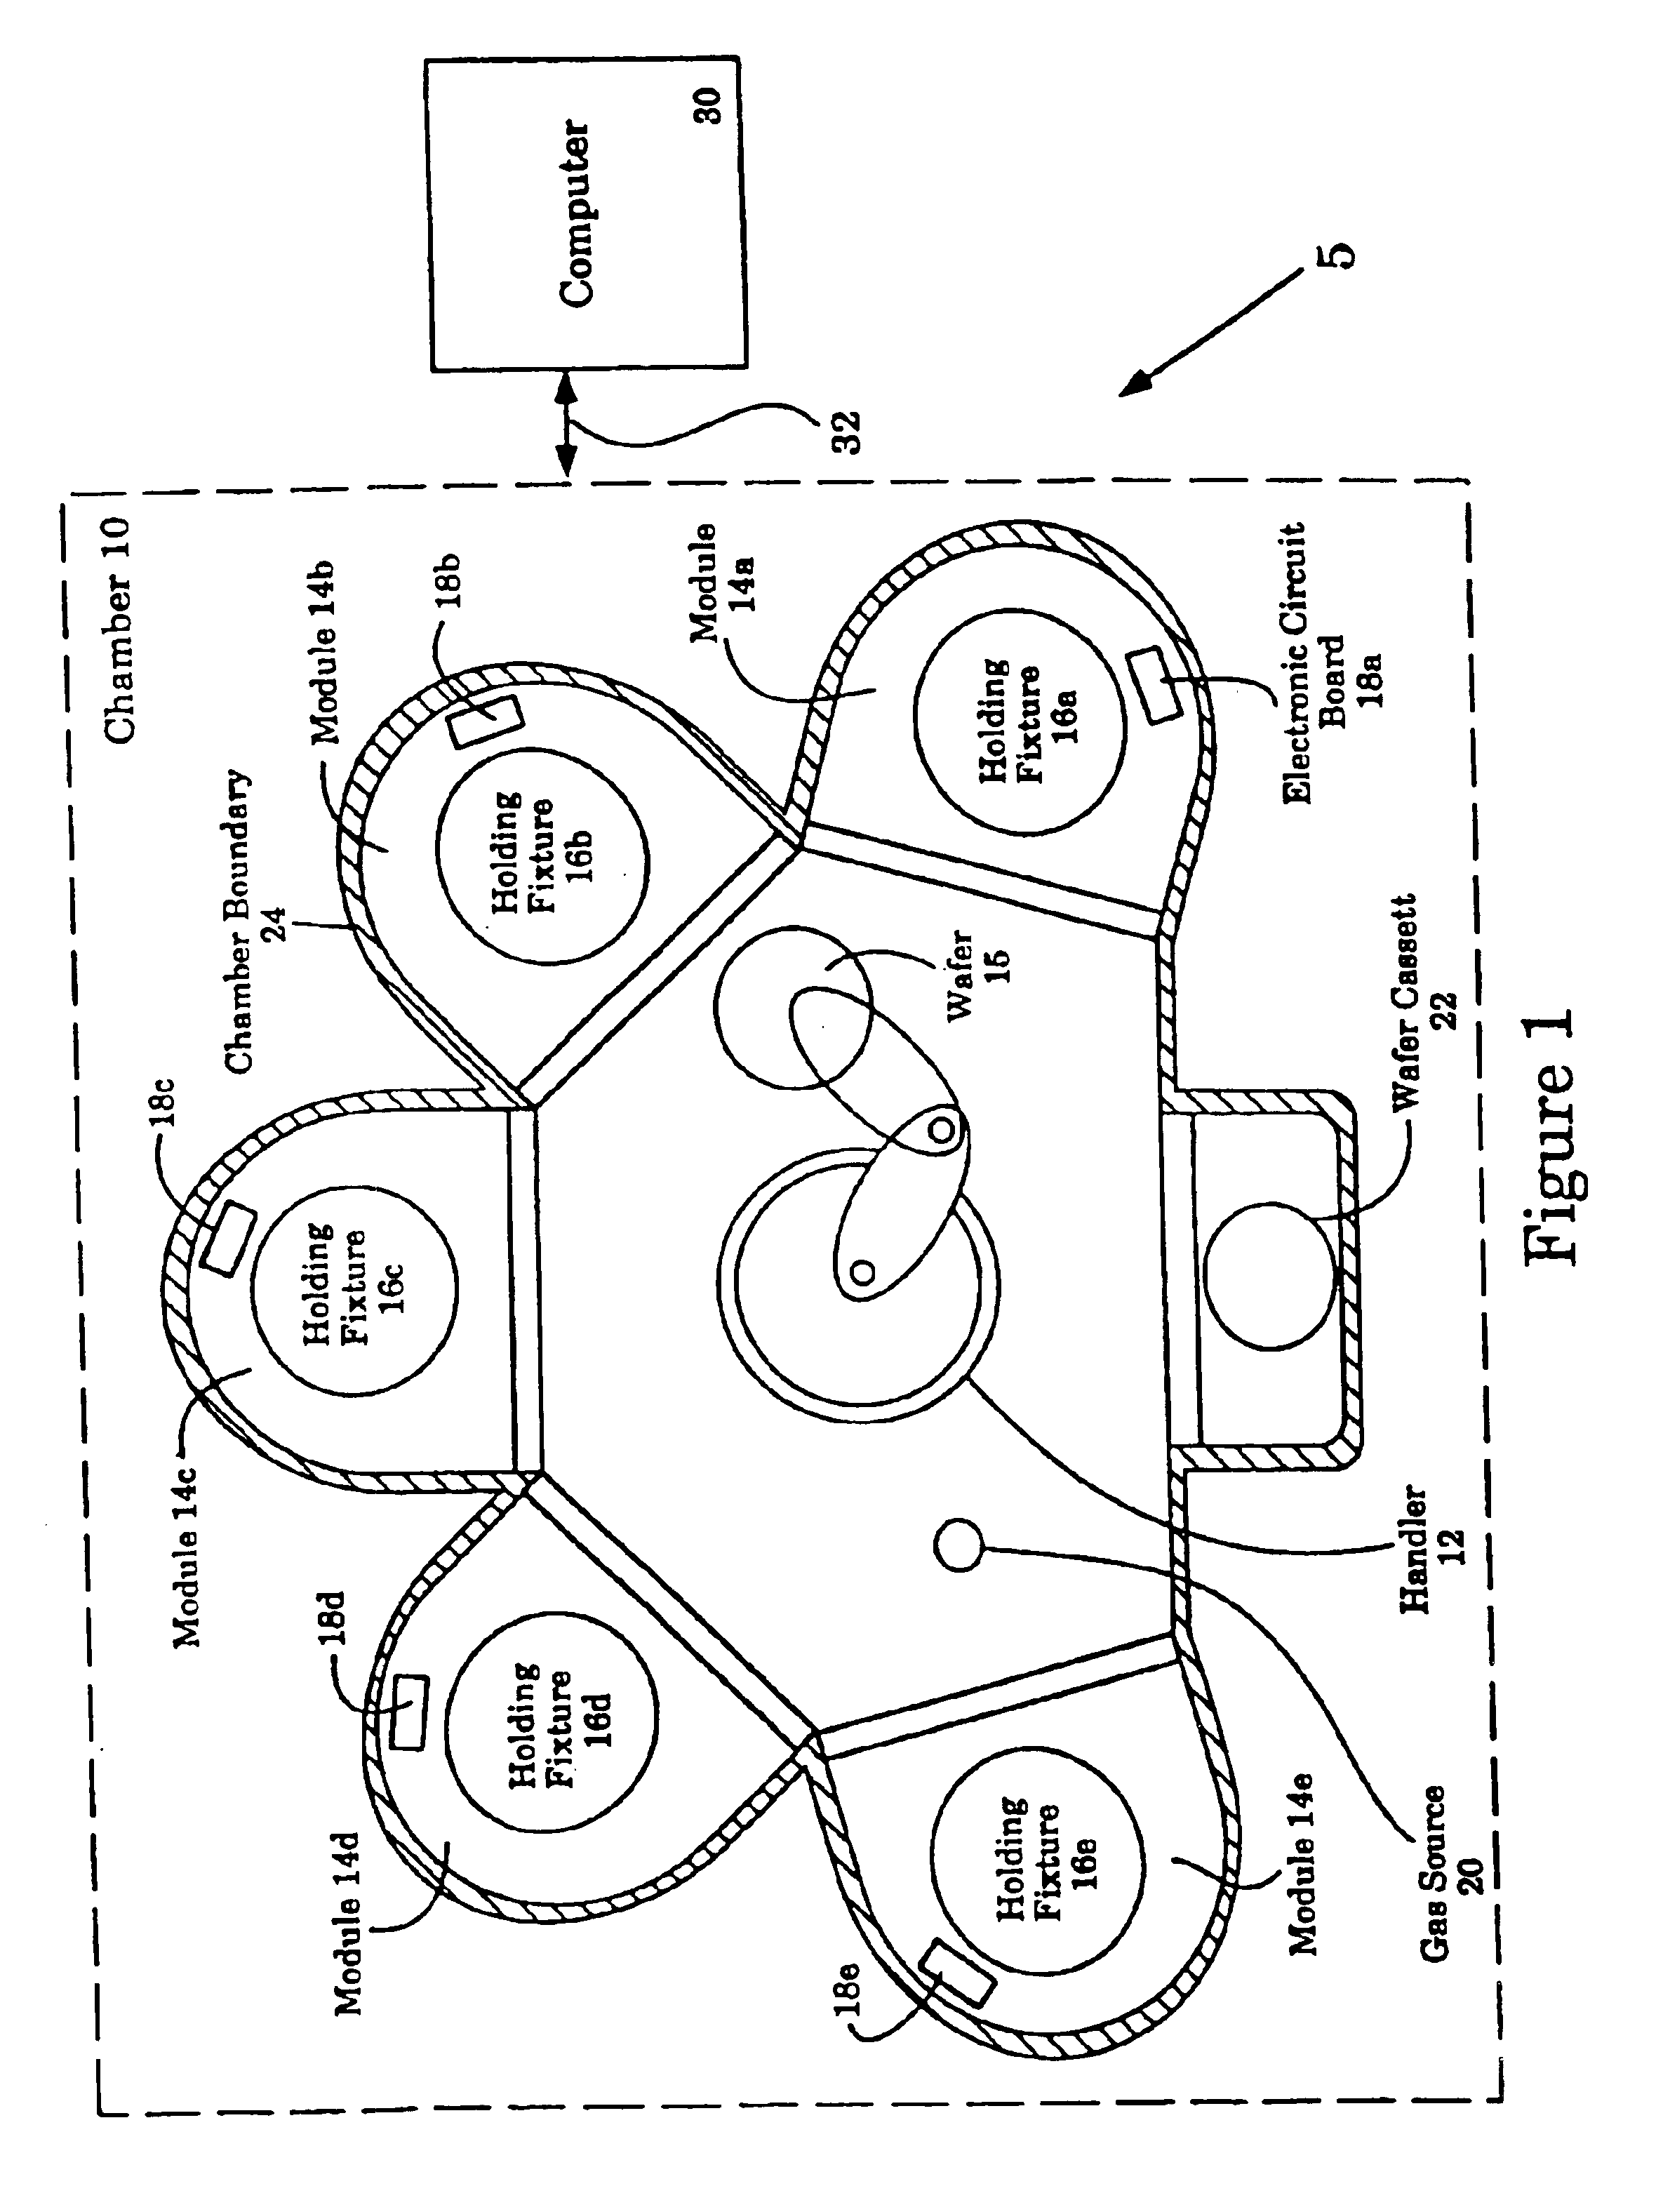 System for probing, testing, burn-in, repairing and programming of integrated circuits